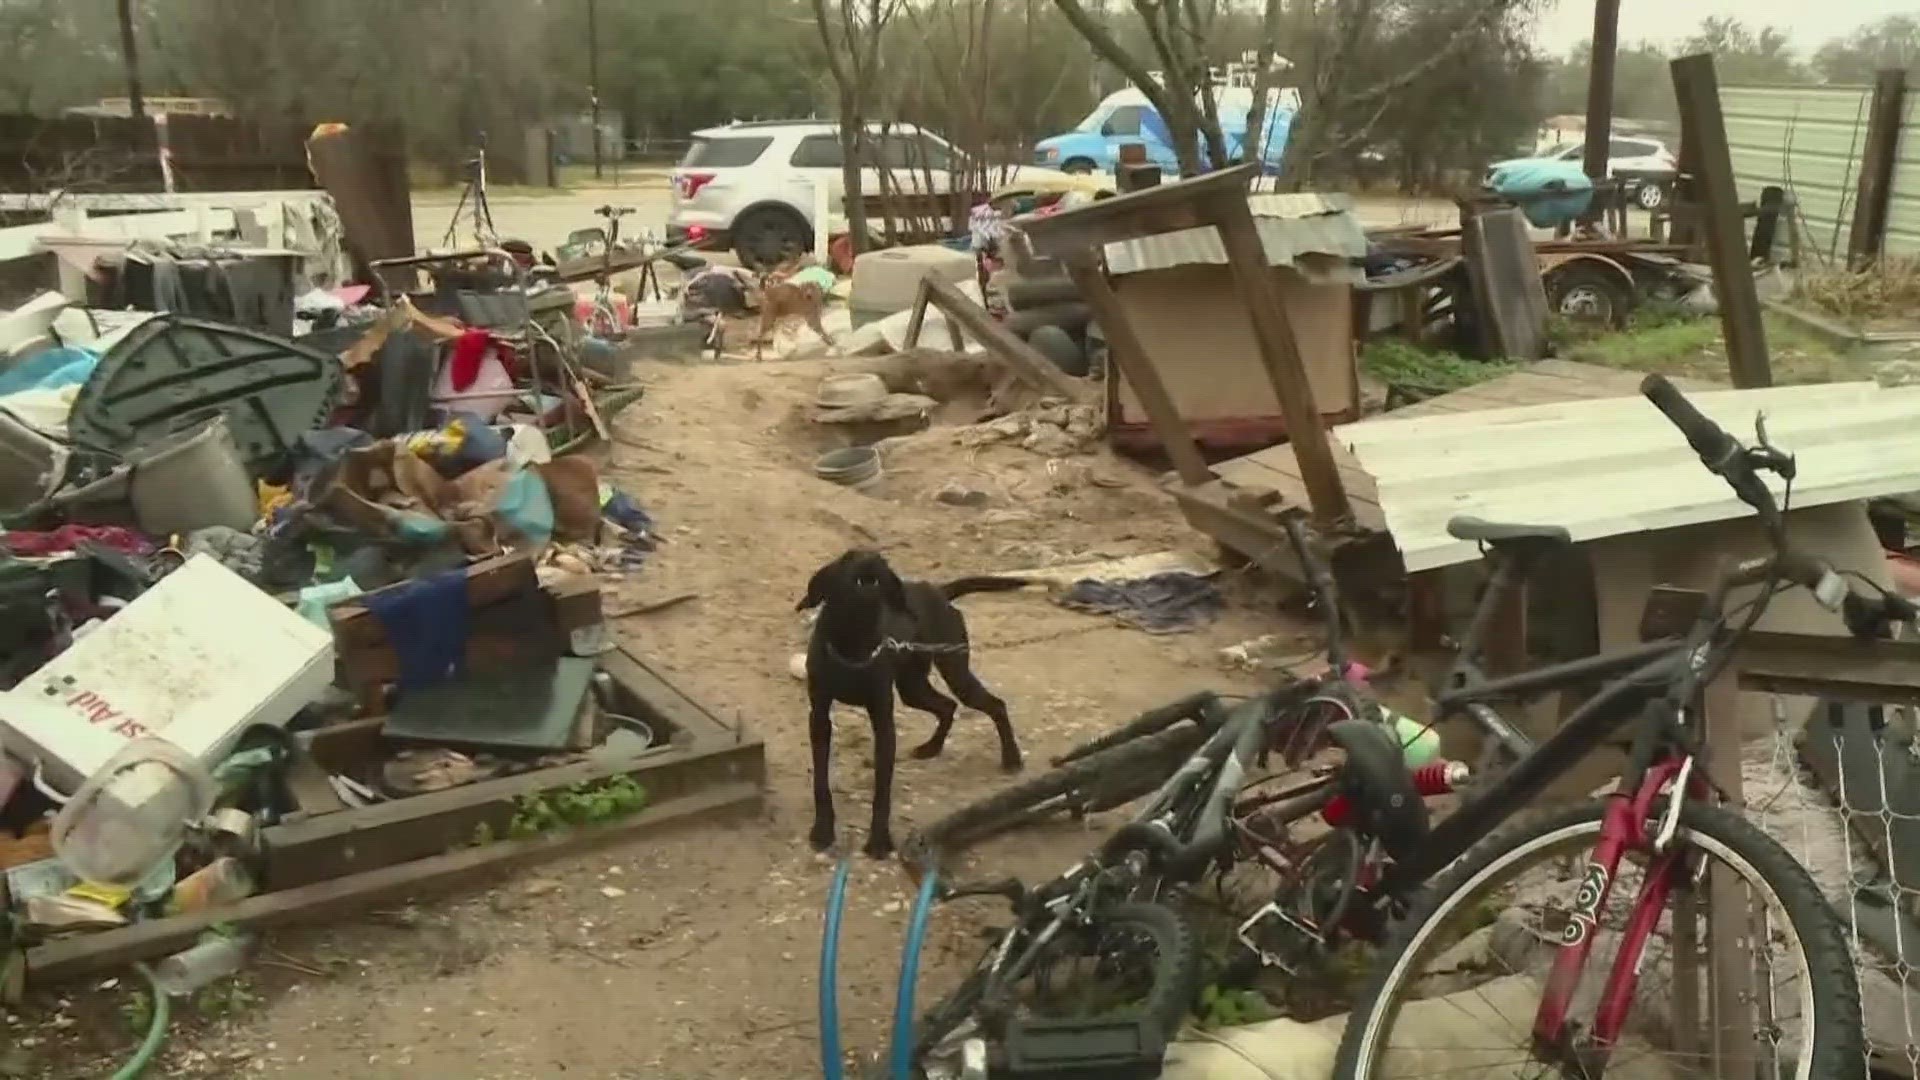 Officials say the dogs were chained to trees, junk and living with garbage.